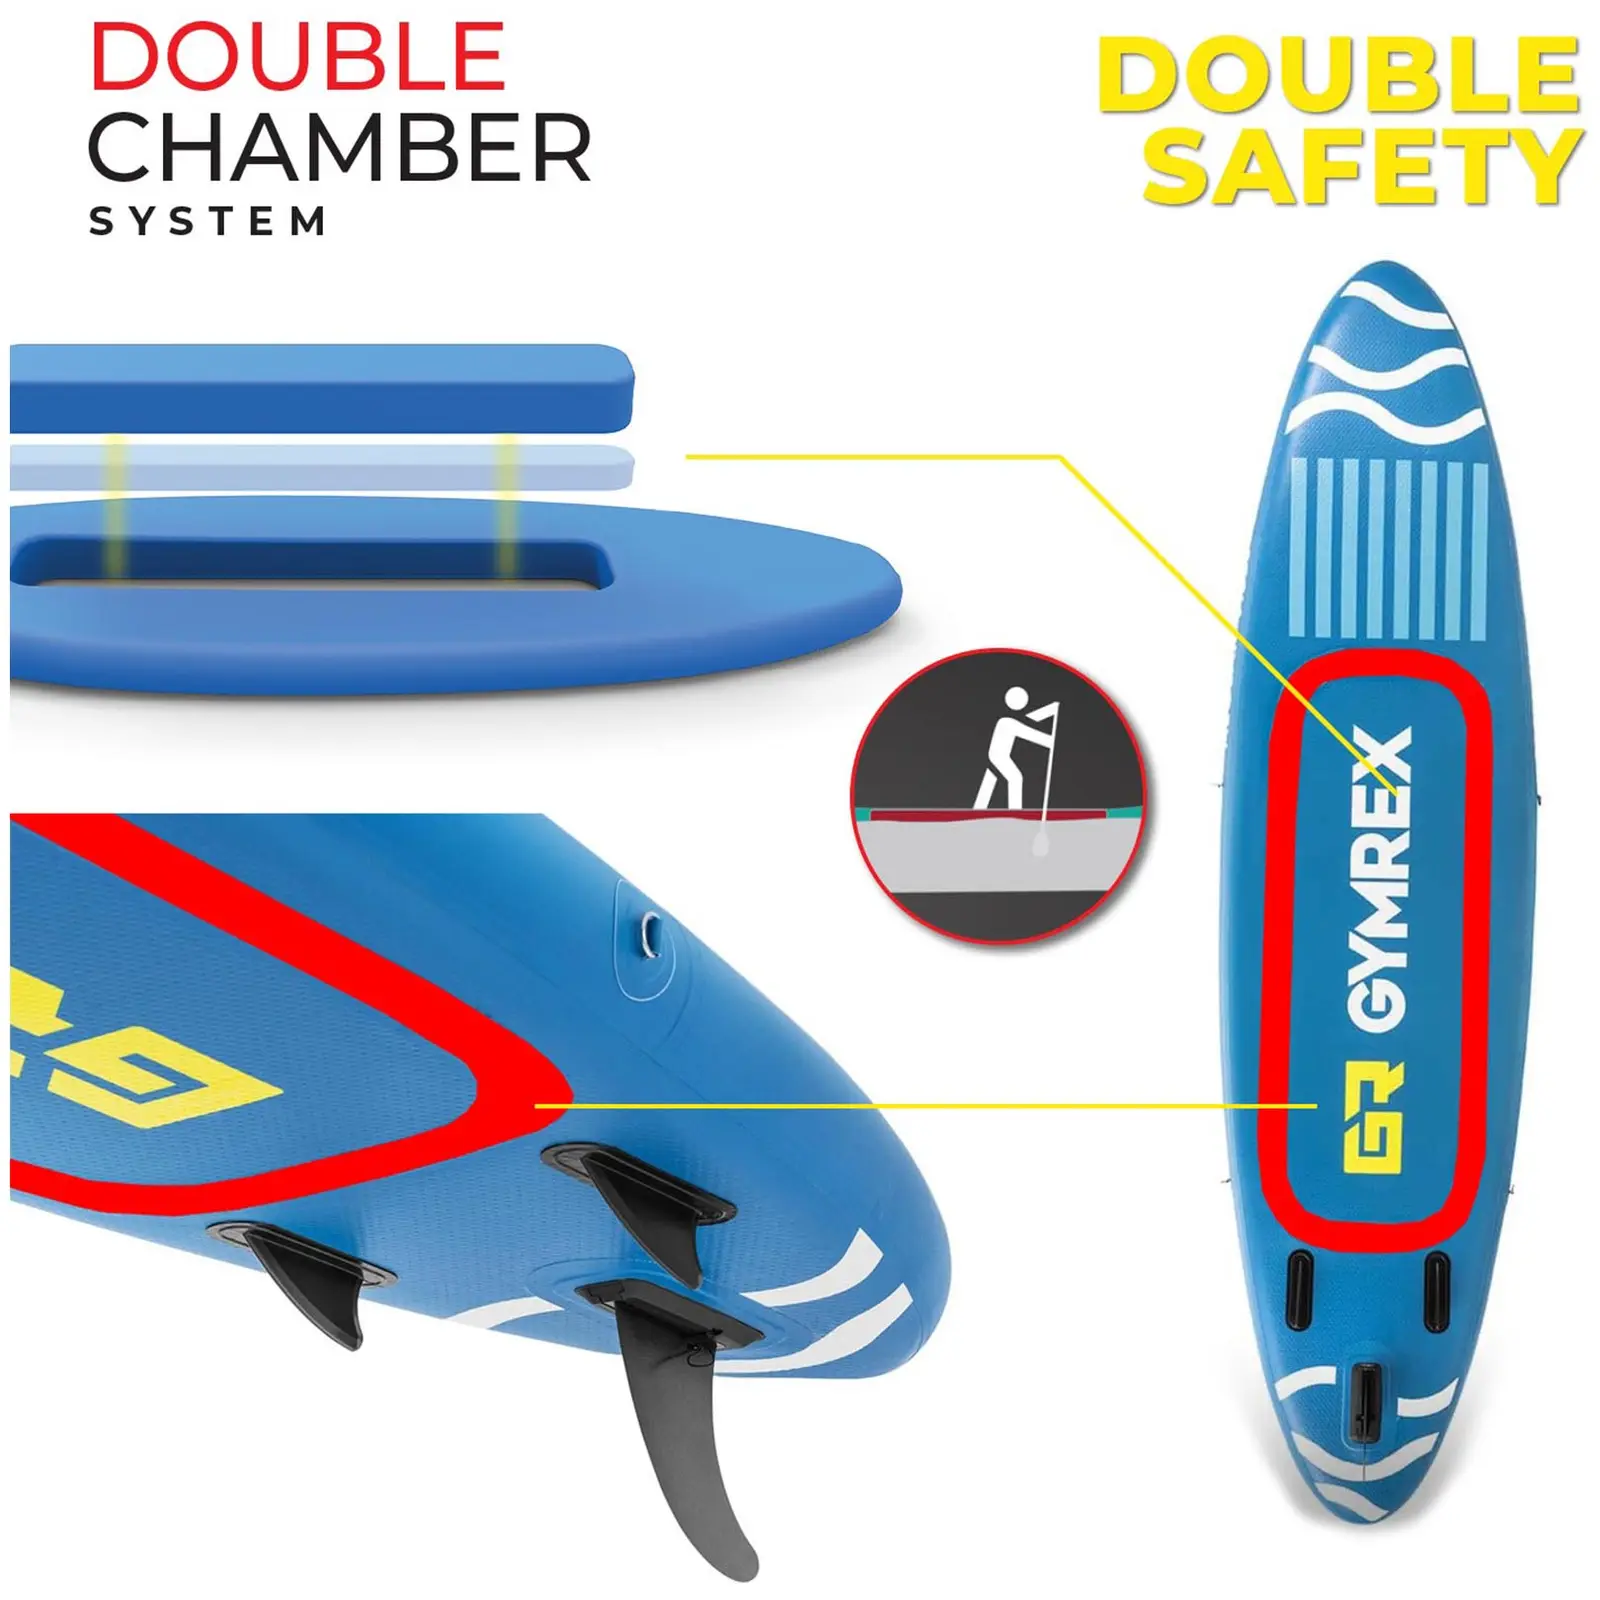 Inflatable paddle board - inflatable - 125 kg - blue - double chamber - 333 x 82 x 12 cm